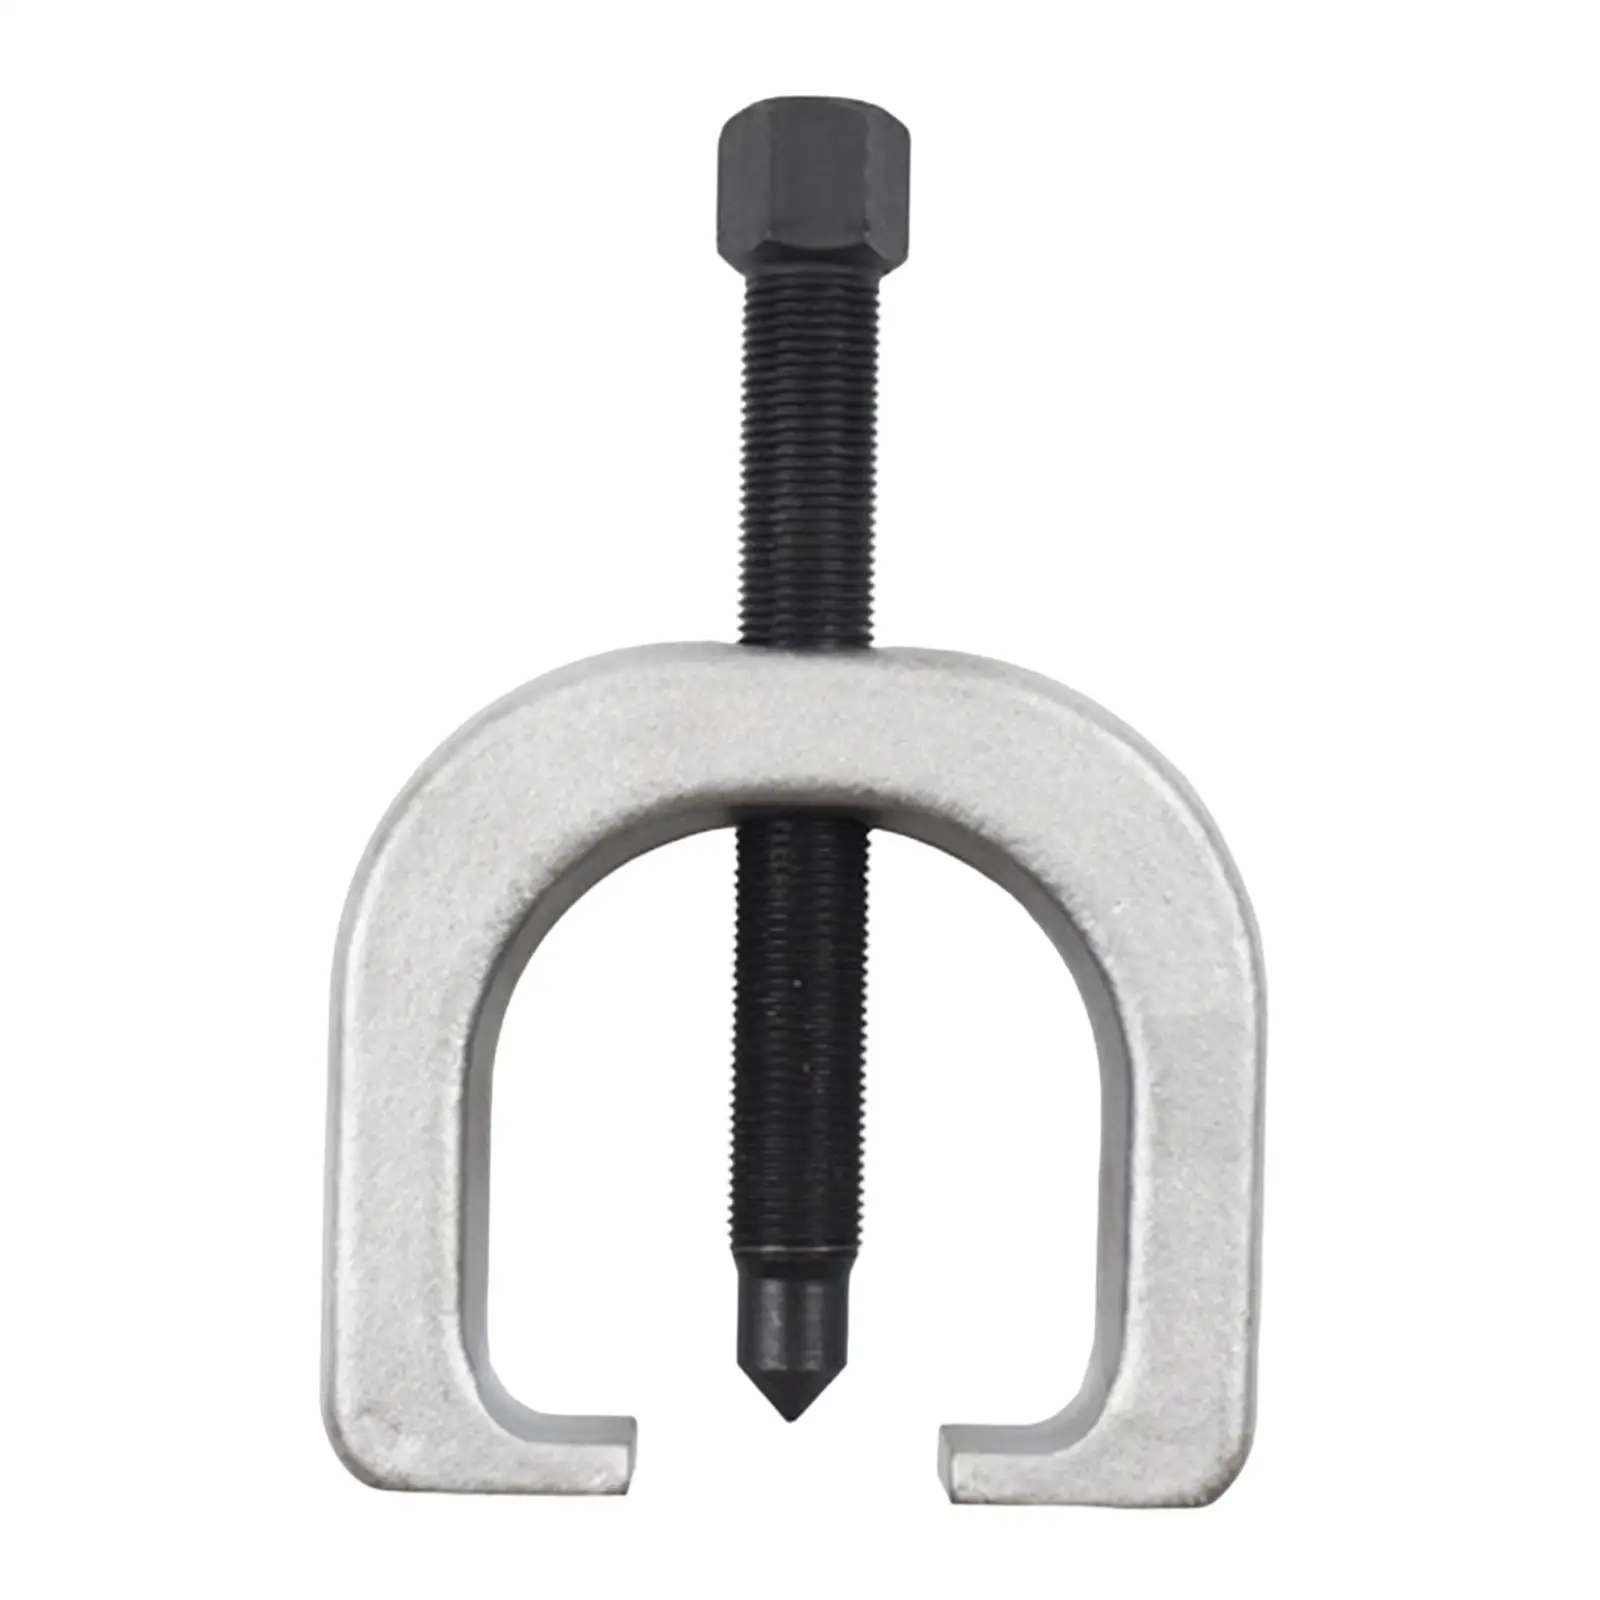 Slack Adjuster Puller Easy to Operate Compact Carbon Steel Repair Tool Removal Tool Maintenance Tool for Trucks Trailers